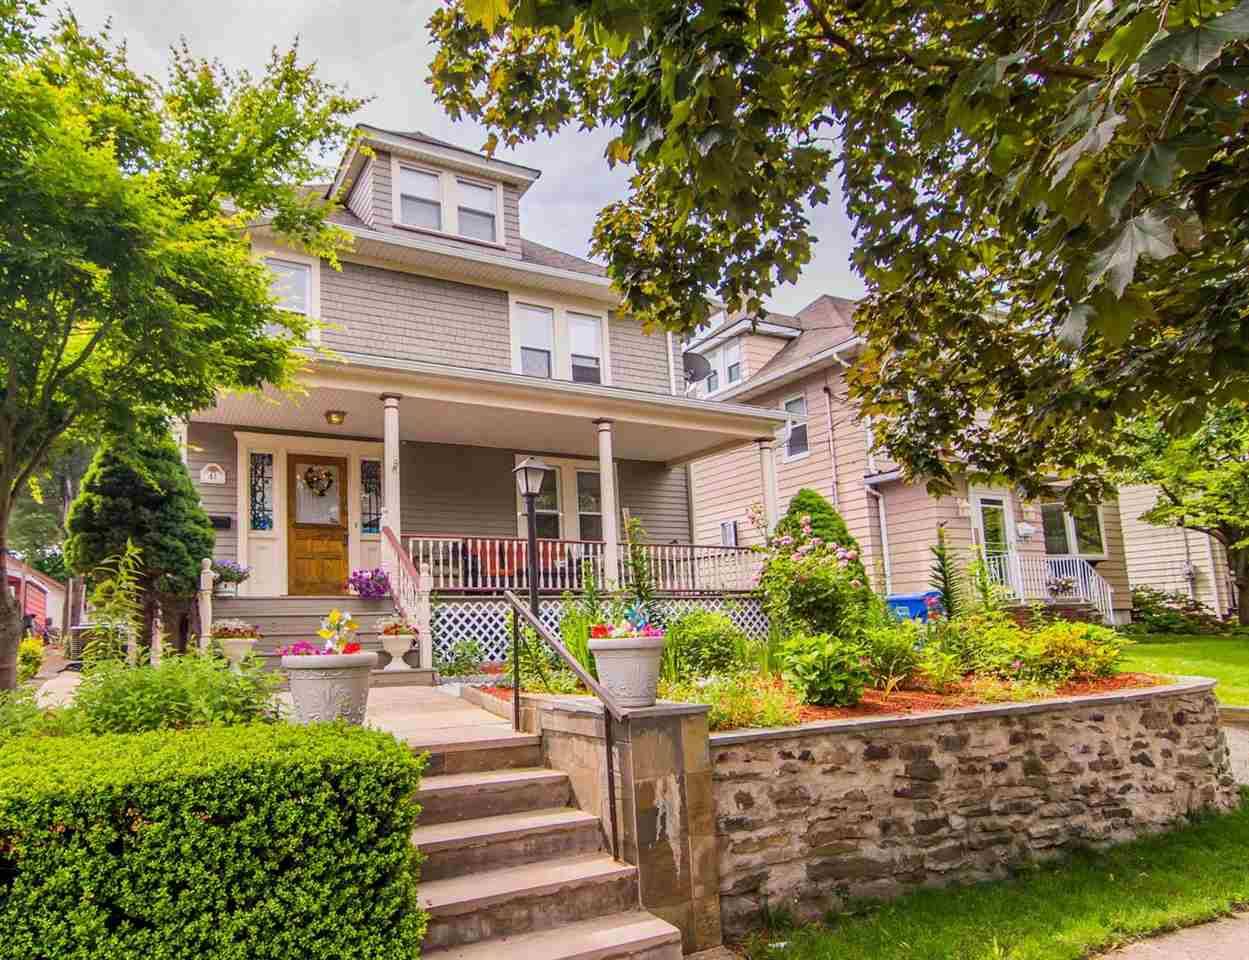 Welcome to this charming Rutherford Colonial with welcoming front porch